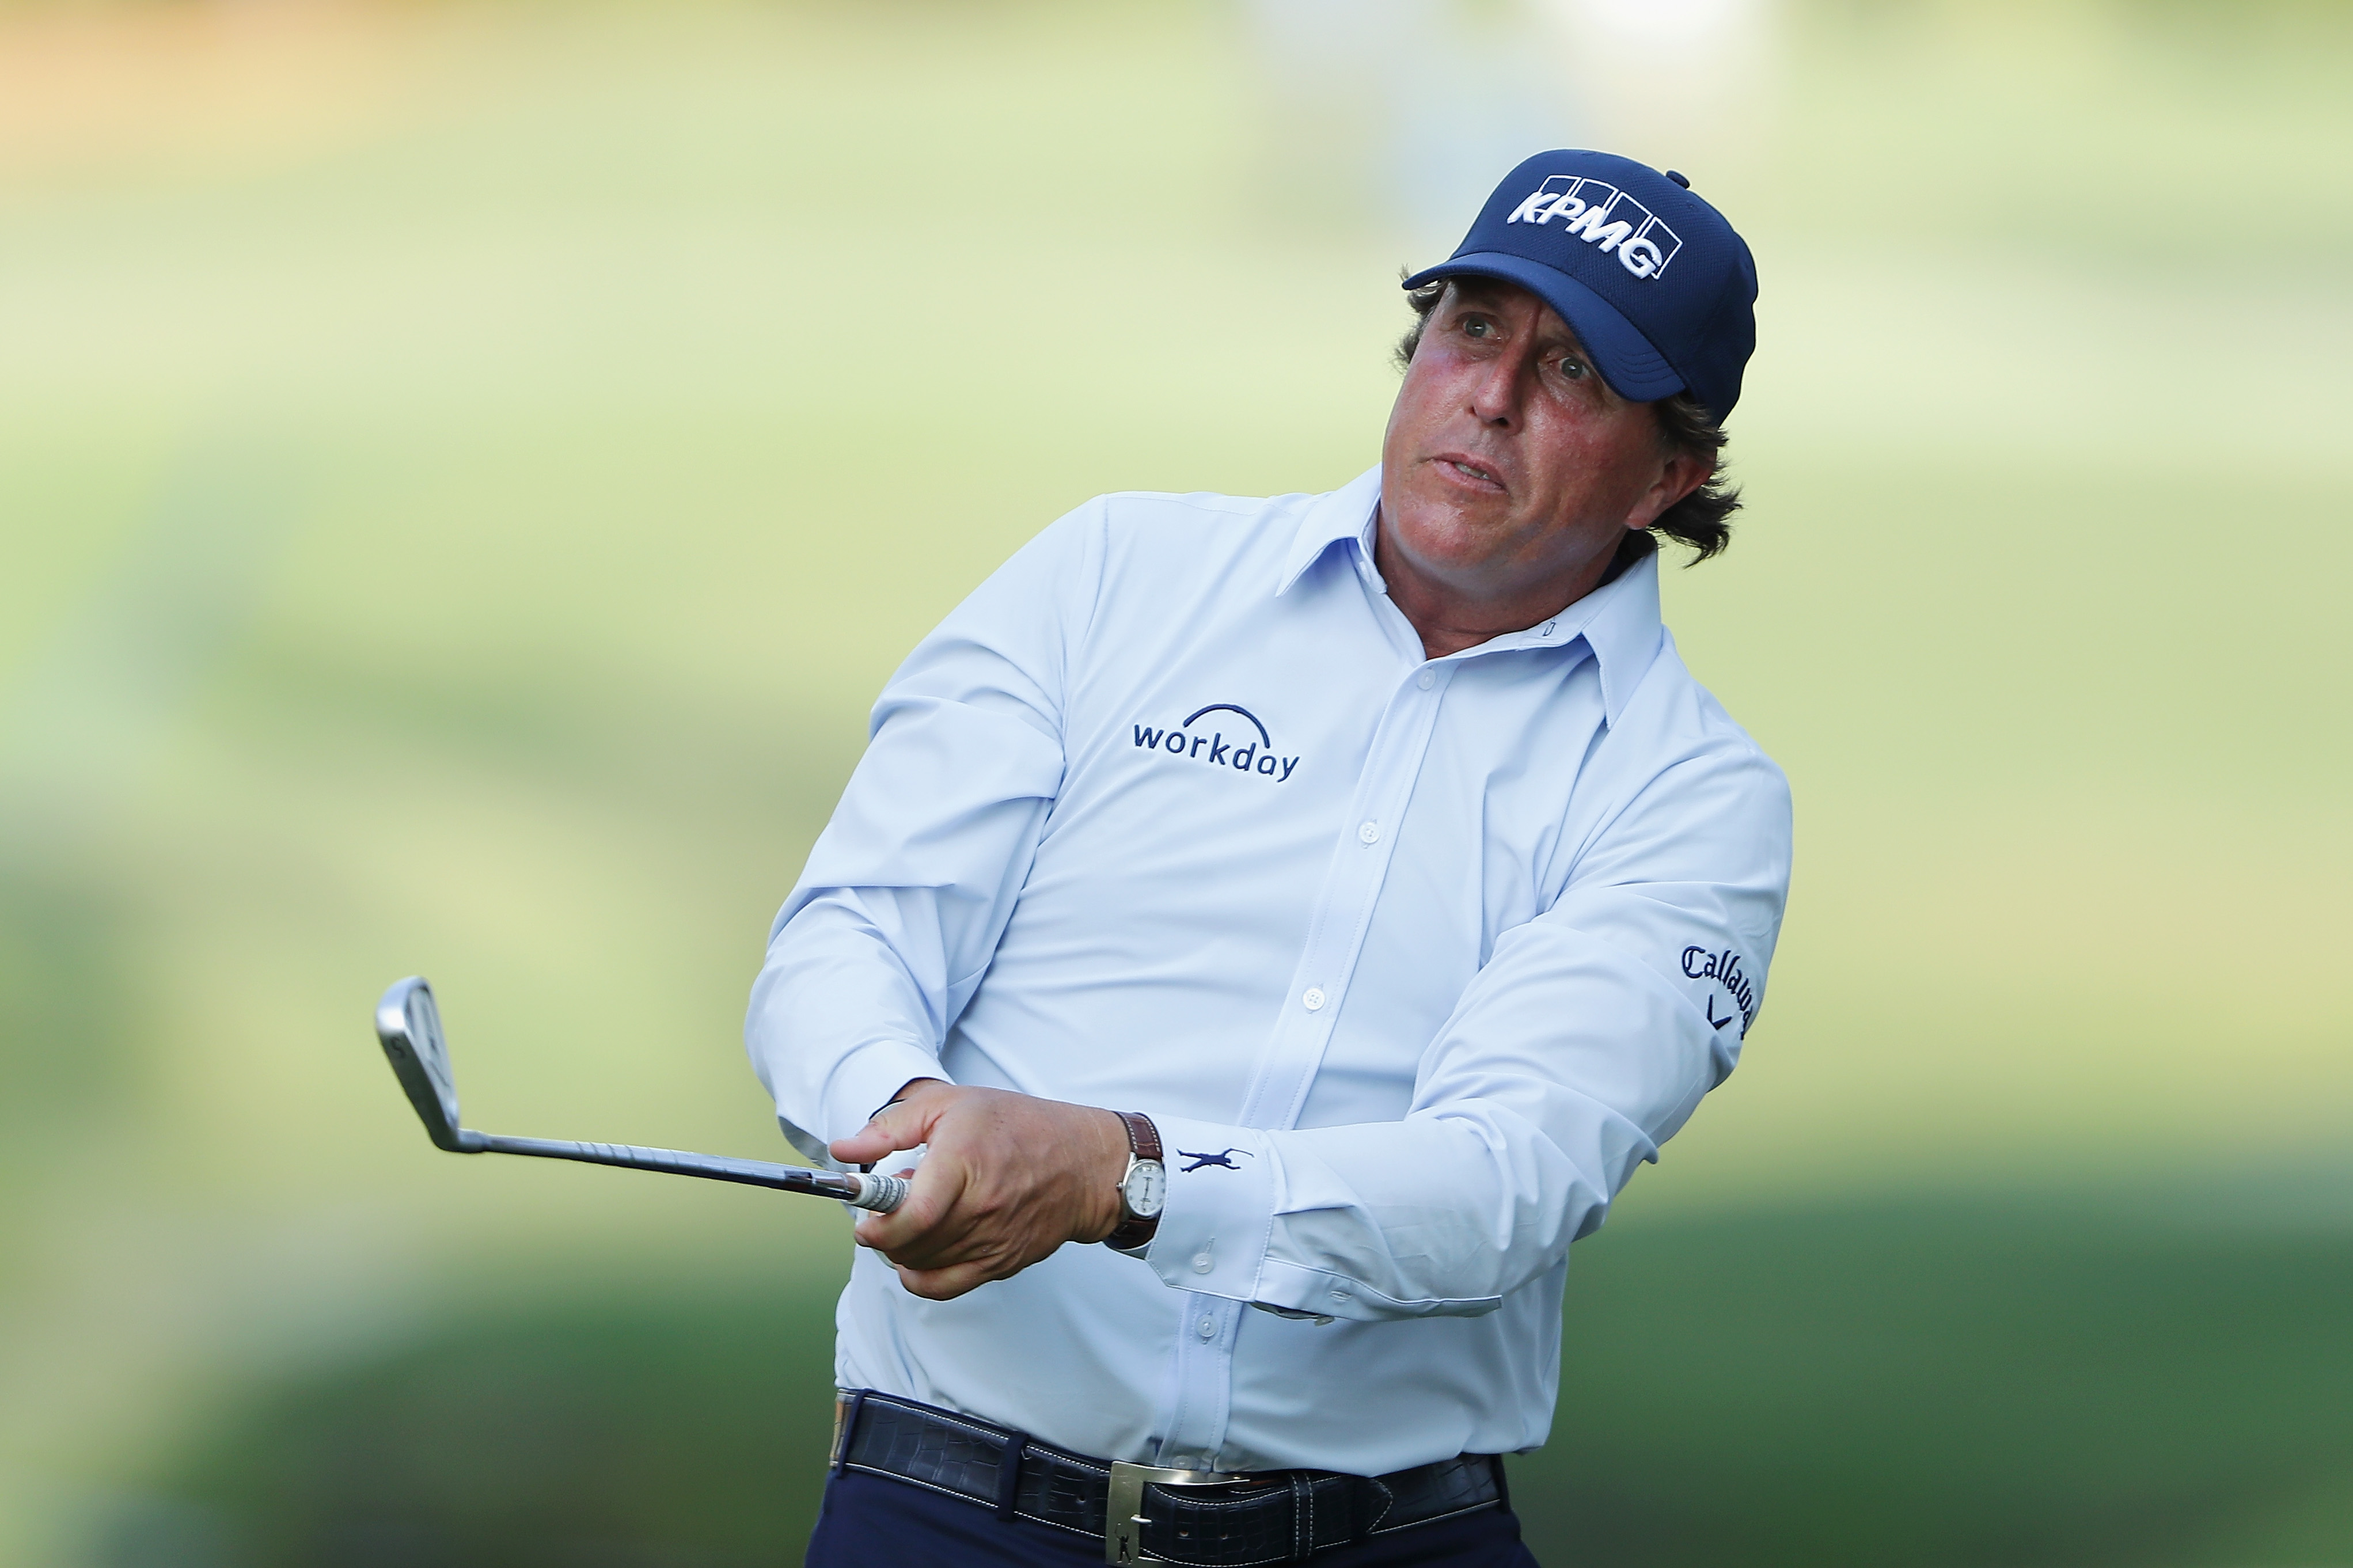 Mickelson has a mare at Sawgrass, social media blames his new button-downed shirt